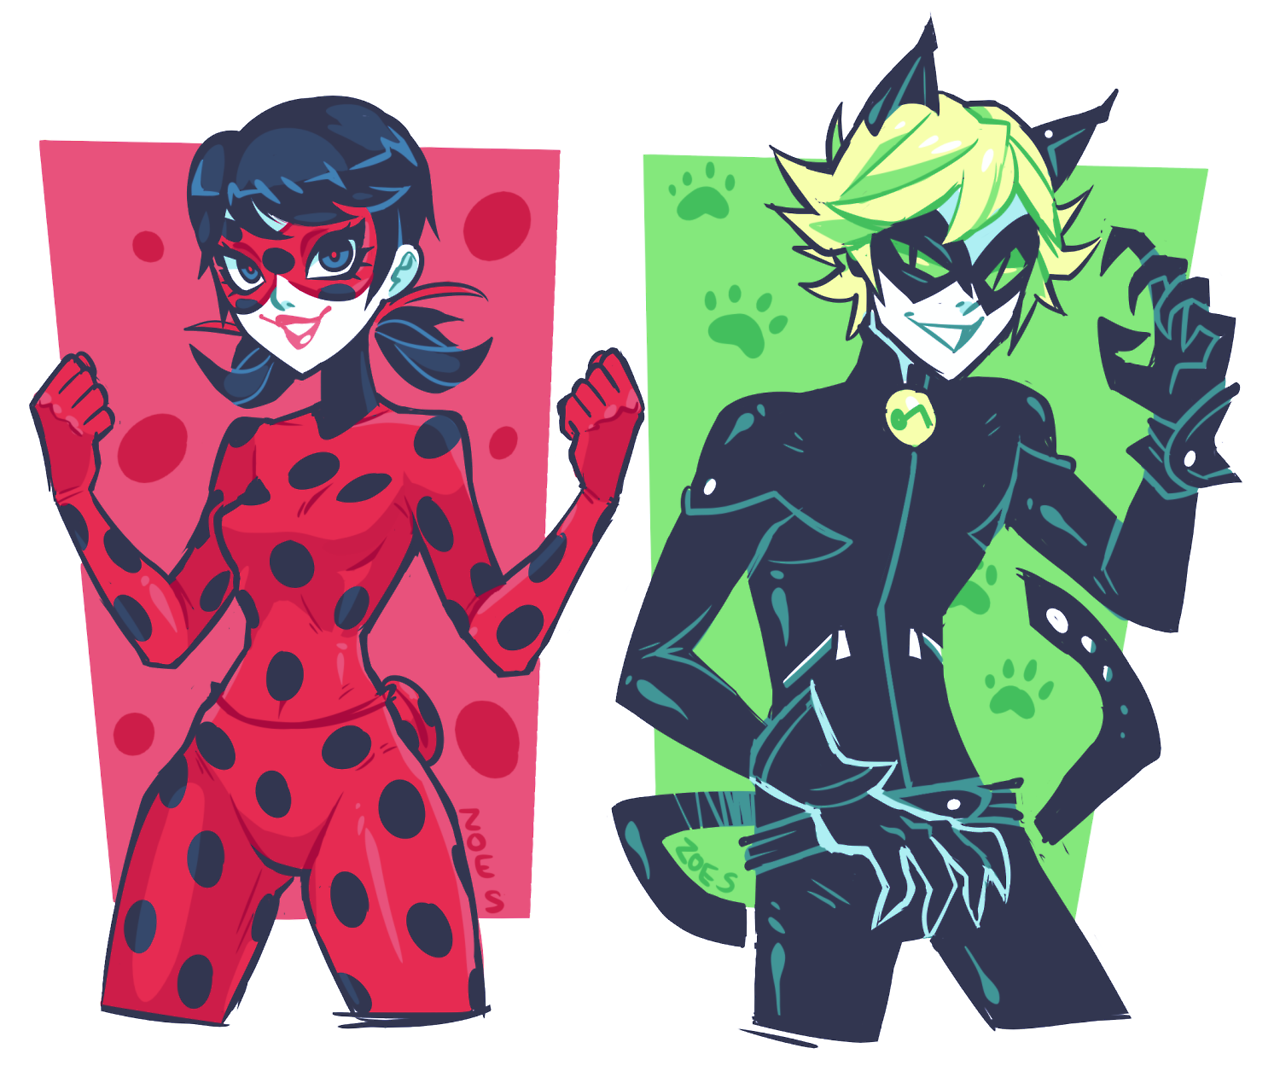 Featured image of post Tumblr Fanart Miraculous Ladybug miraculous ladybug marichat miraculous zine chat noir miraculous ladybug fanart marinette dupain cheng kitty love zine ml fanart my art this zine is always a blast to work with everyone s art and fics turned out so lovely im crying